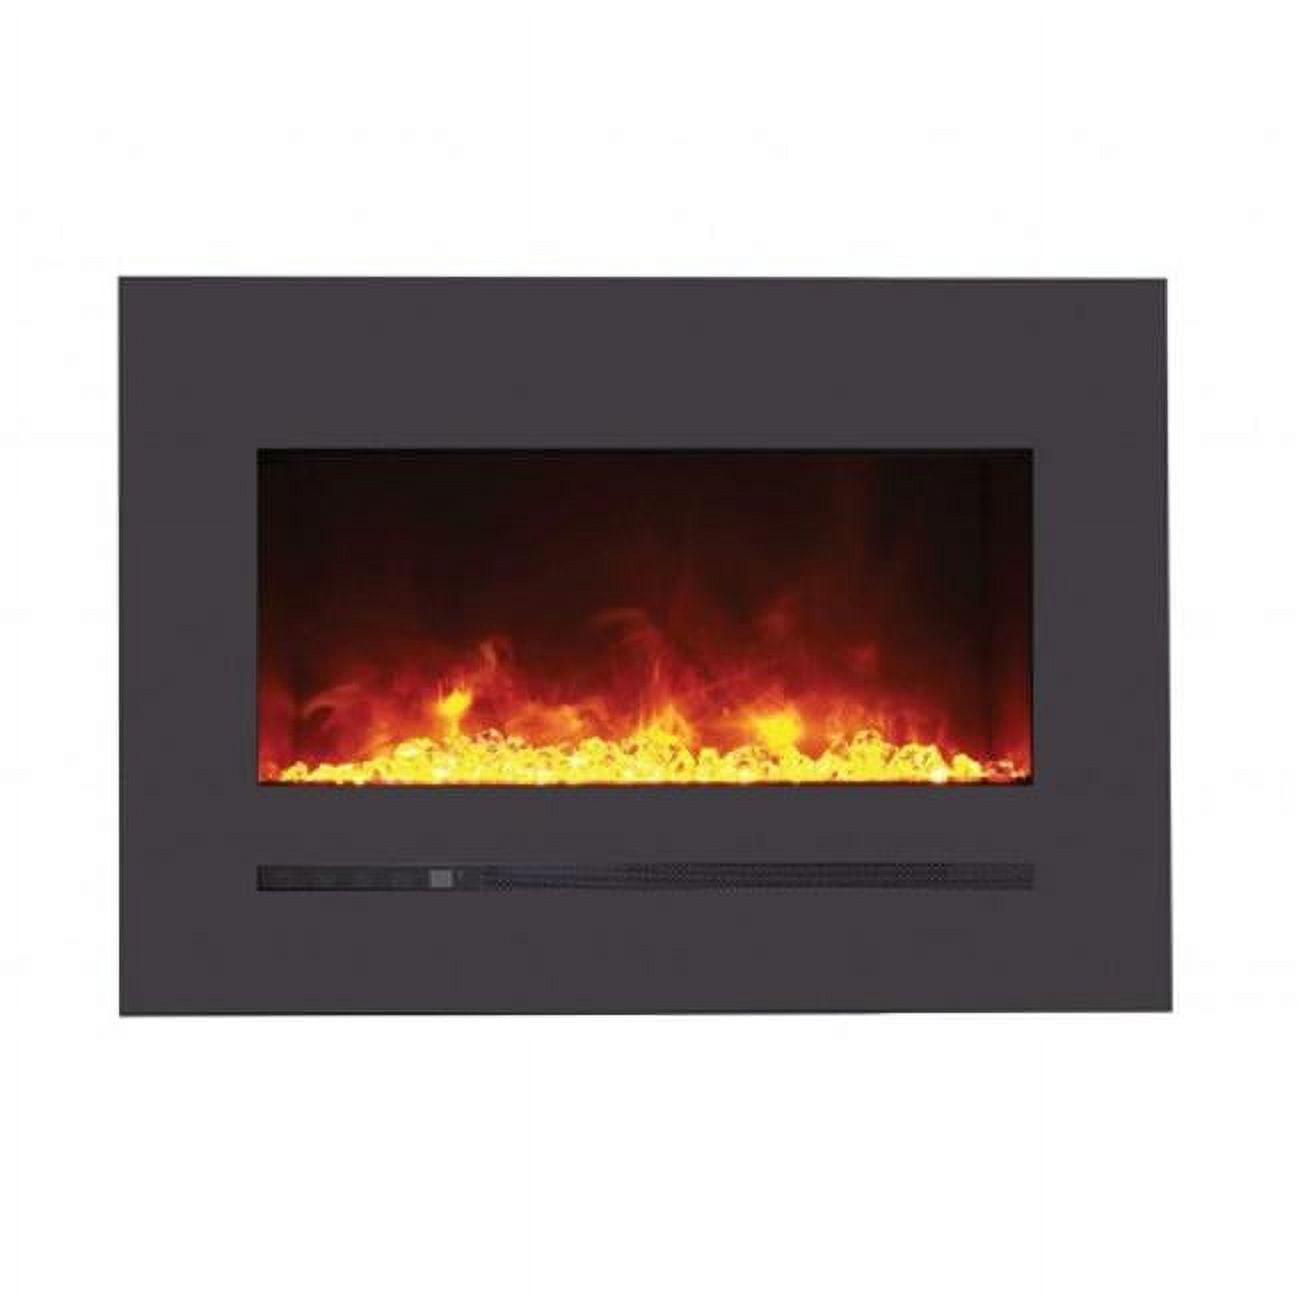 Wm-fml-26-3223-stl 26 In. Wall & Flush Mount Electric Linear Fireplace With Steel Surround & Clear Media